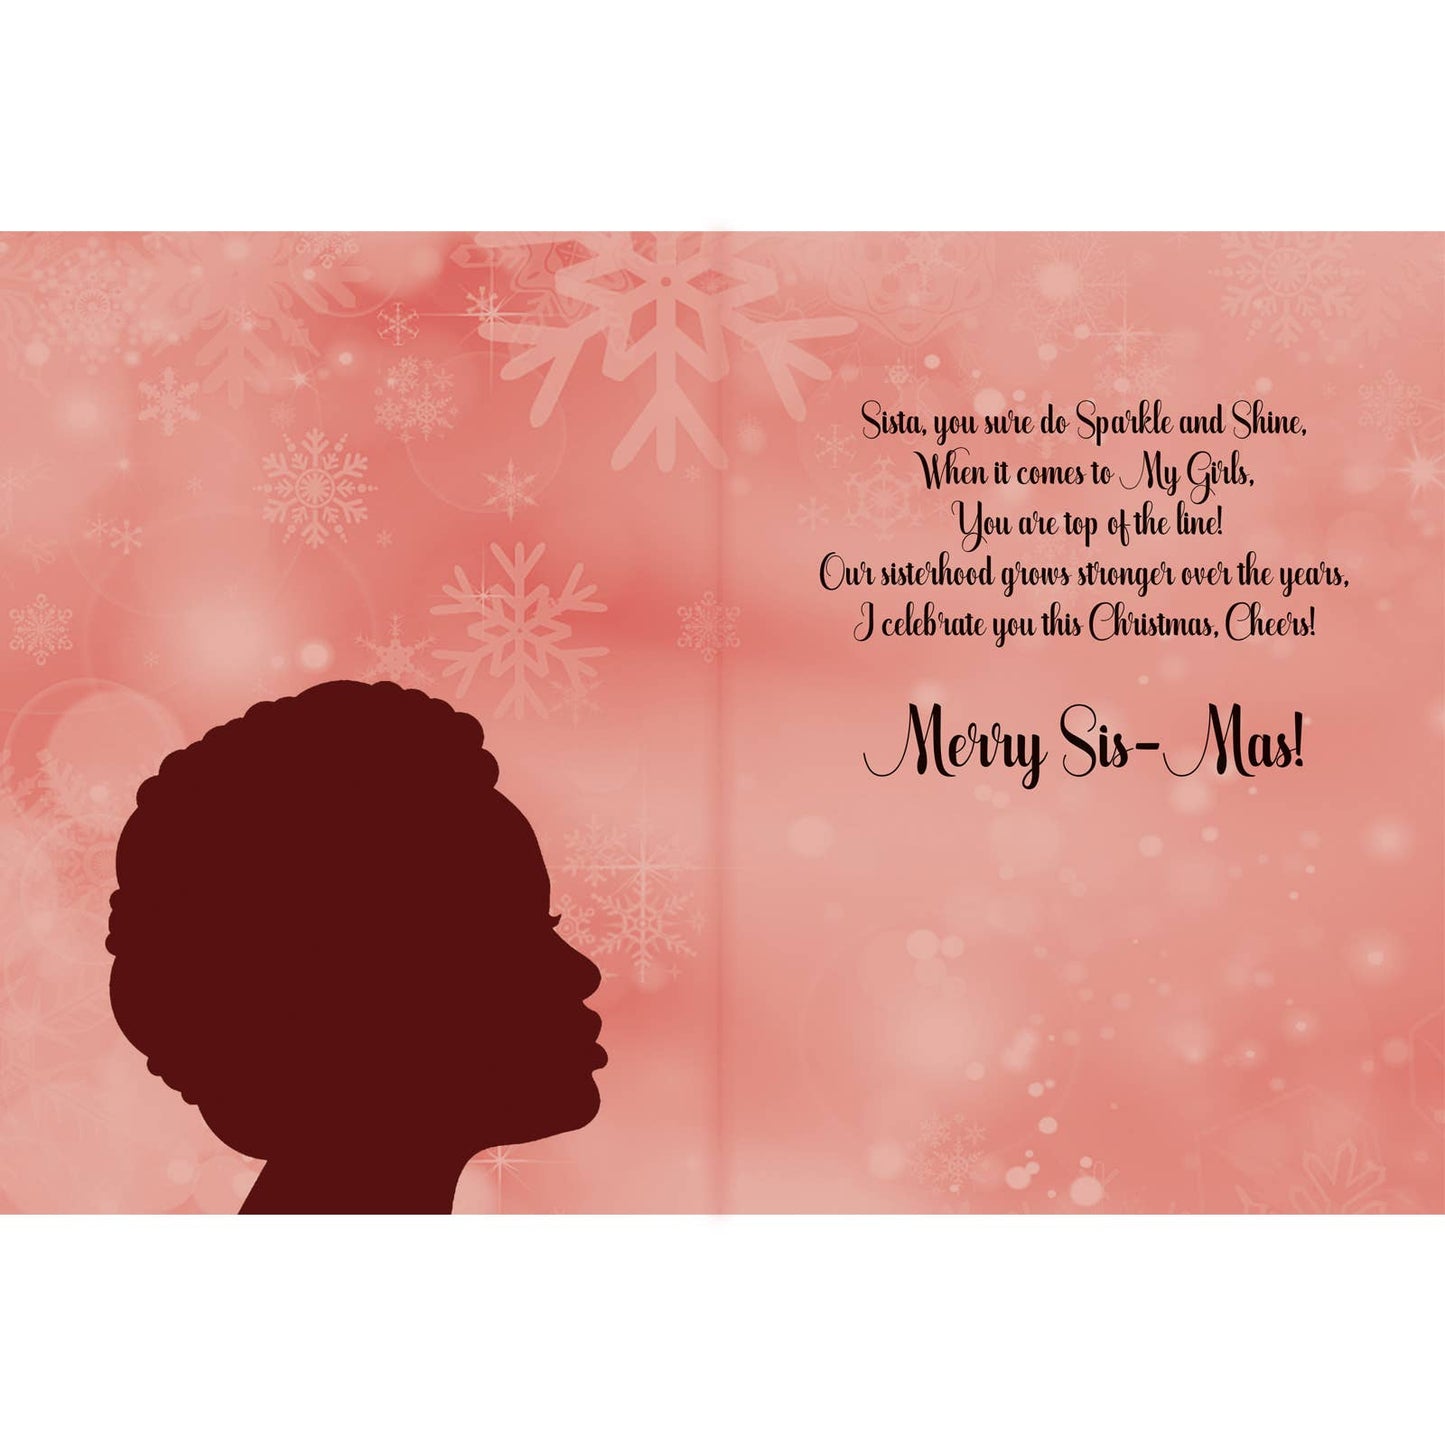 Shades of Color, LLC - Holiday Christmas Cards & Envelopes Sistas Sparkle & Shine